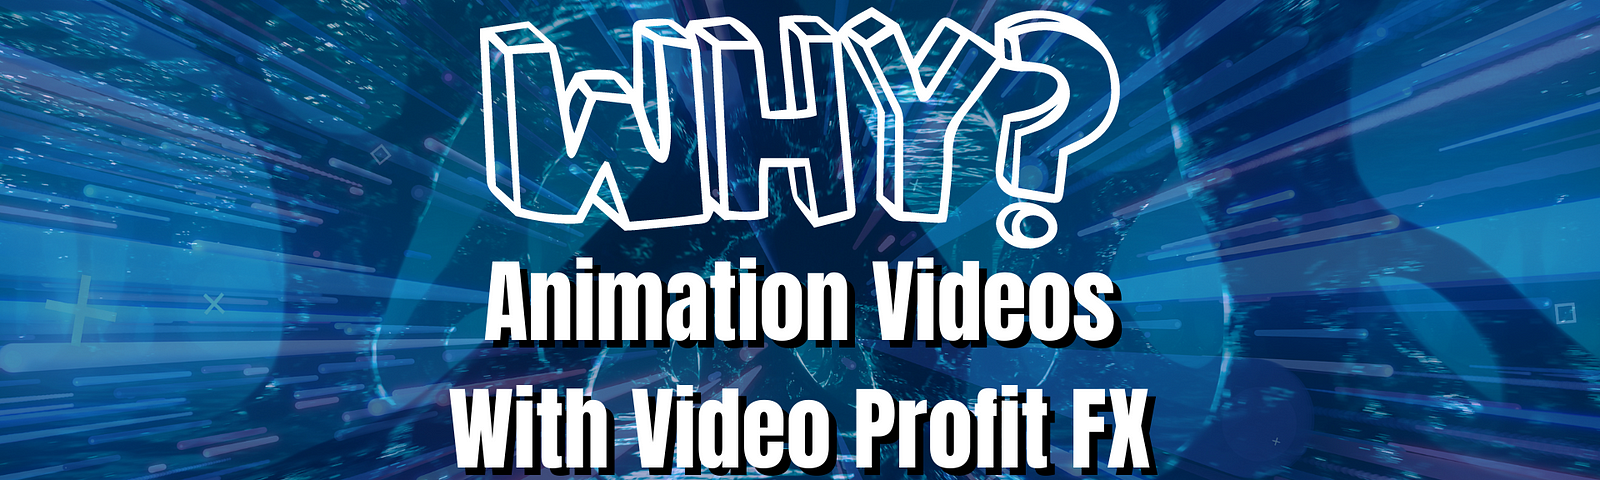 Video Profit FX Review For Affiliate Marketers Taking YouTube To The Next Sales Level